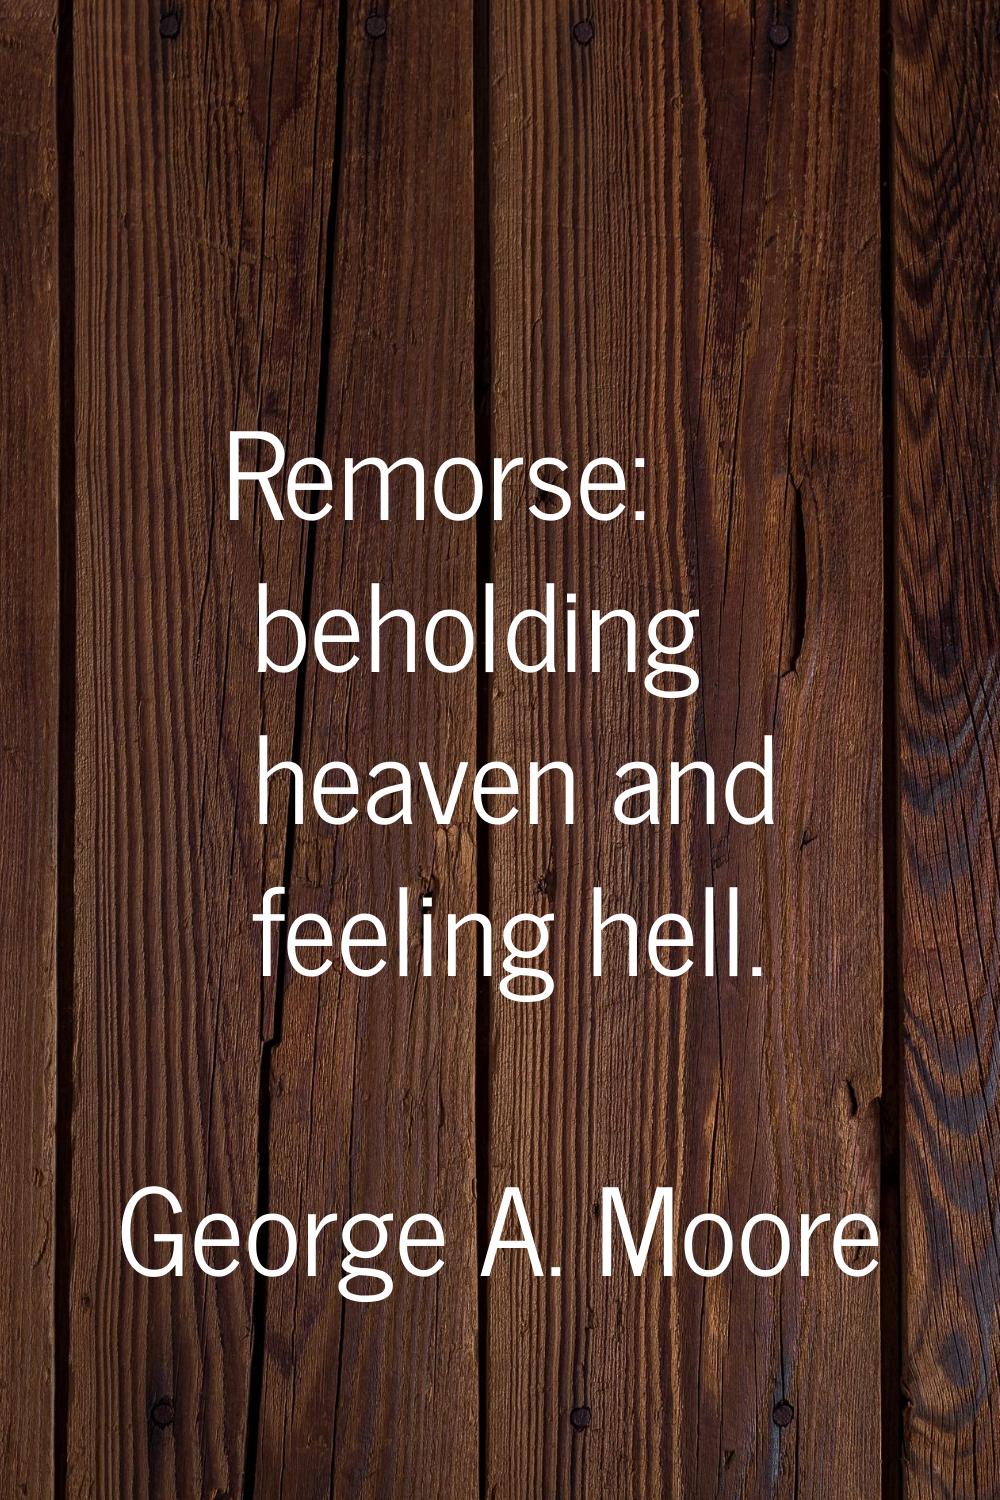 Remorse: beholding heaven and feeling hell.